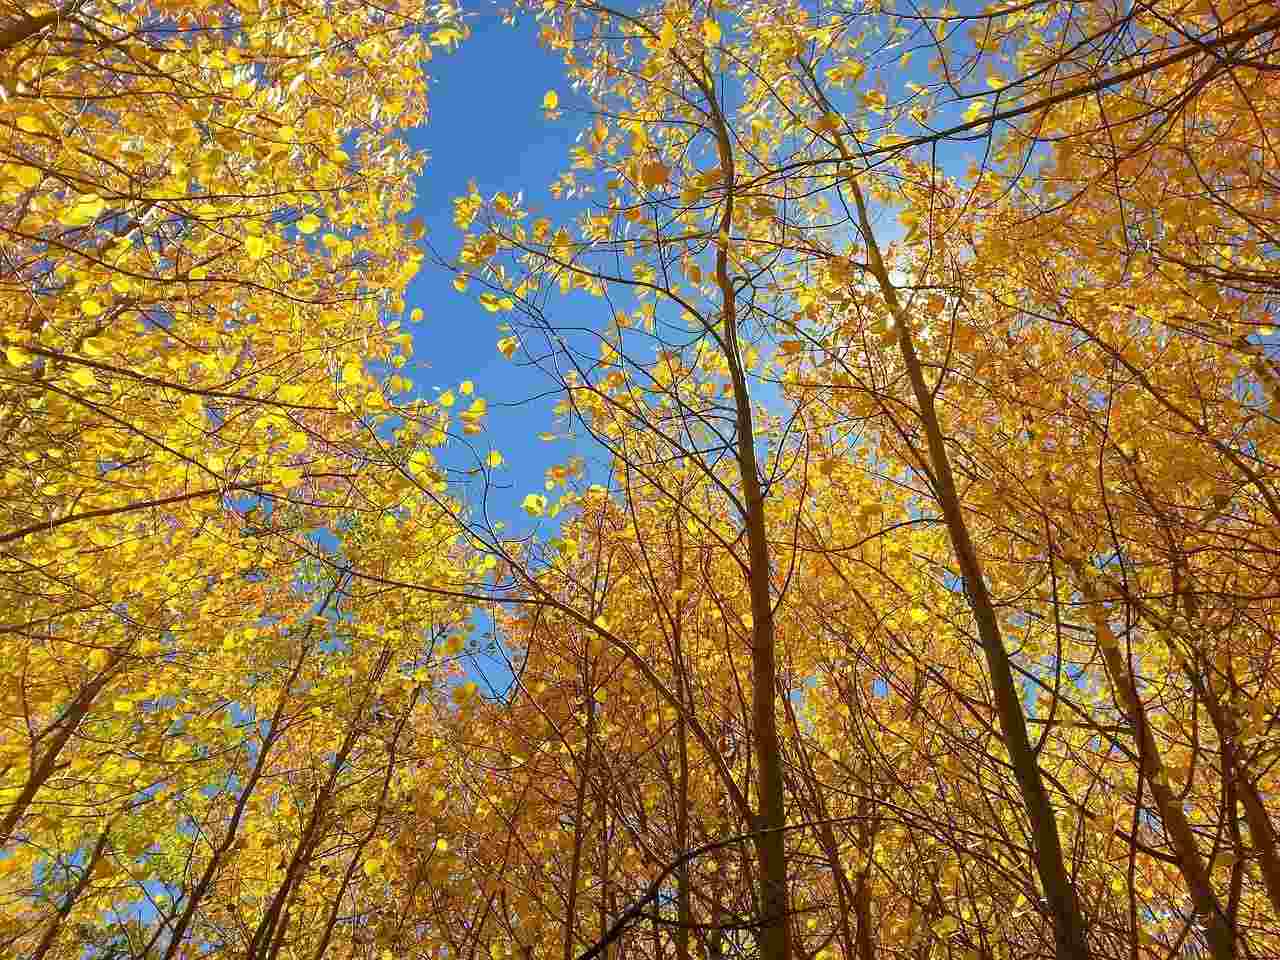 Quaking aspen tree is a common kind of aspen found in and around North America.